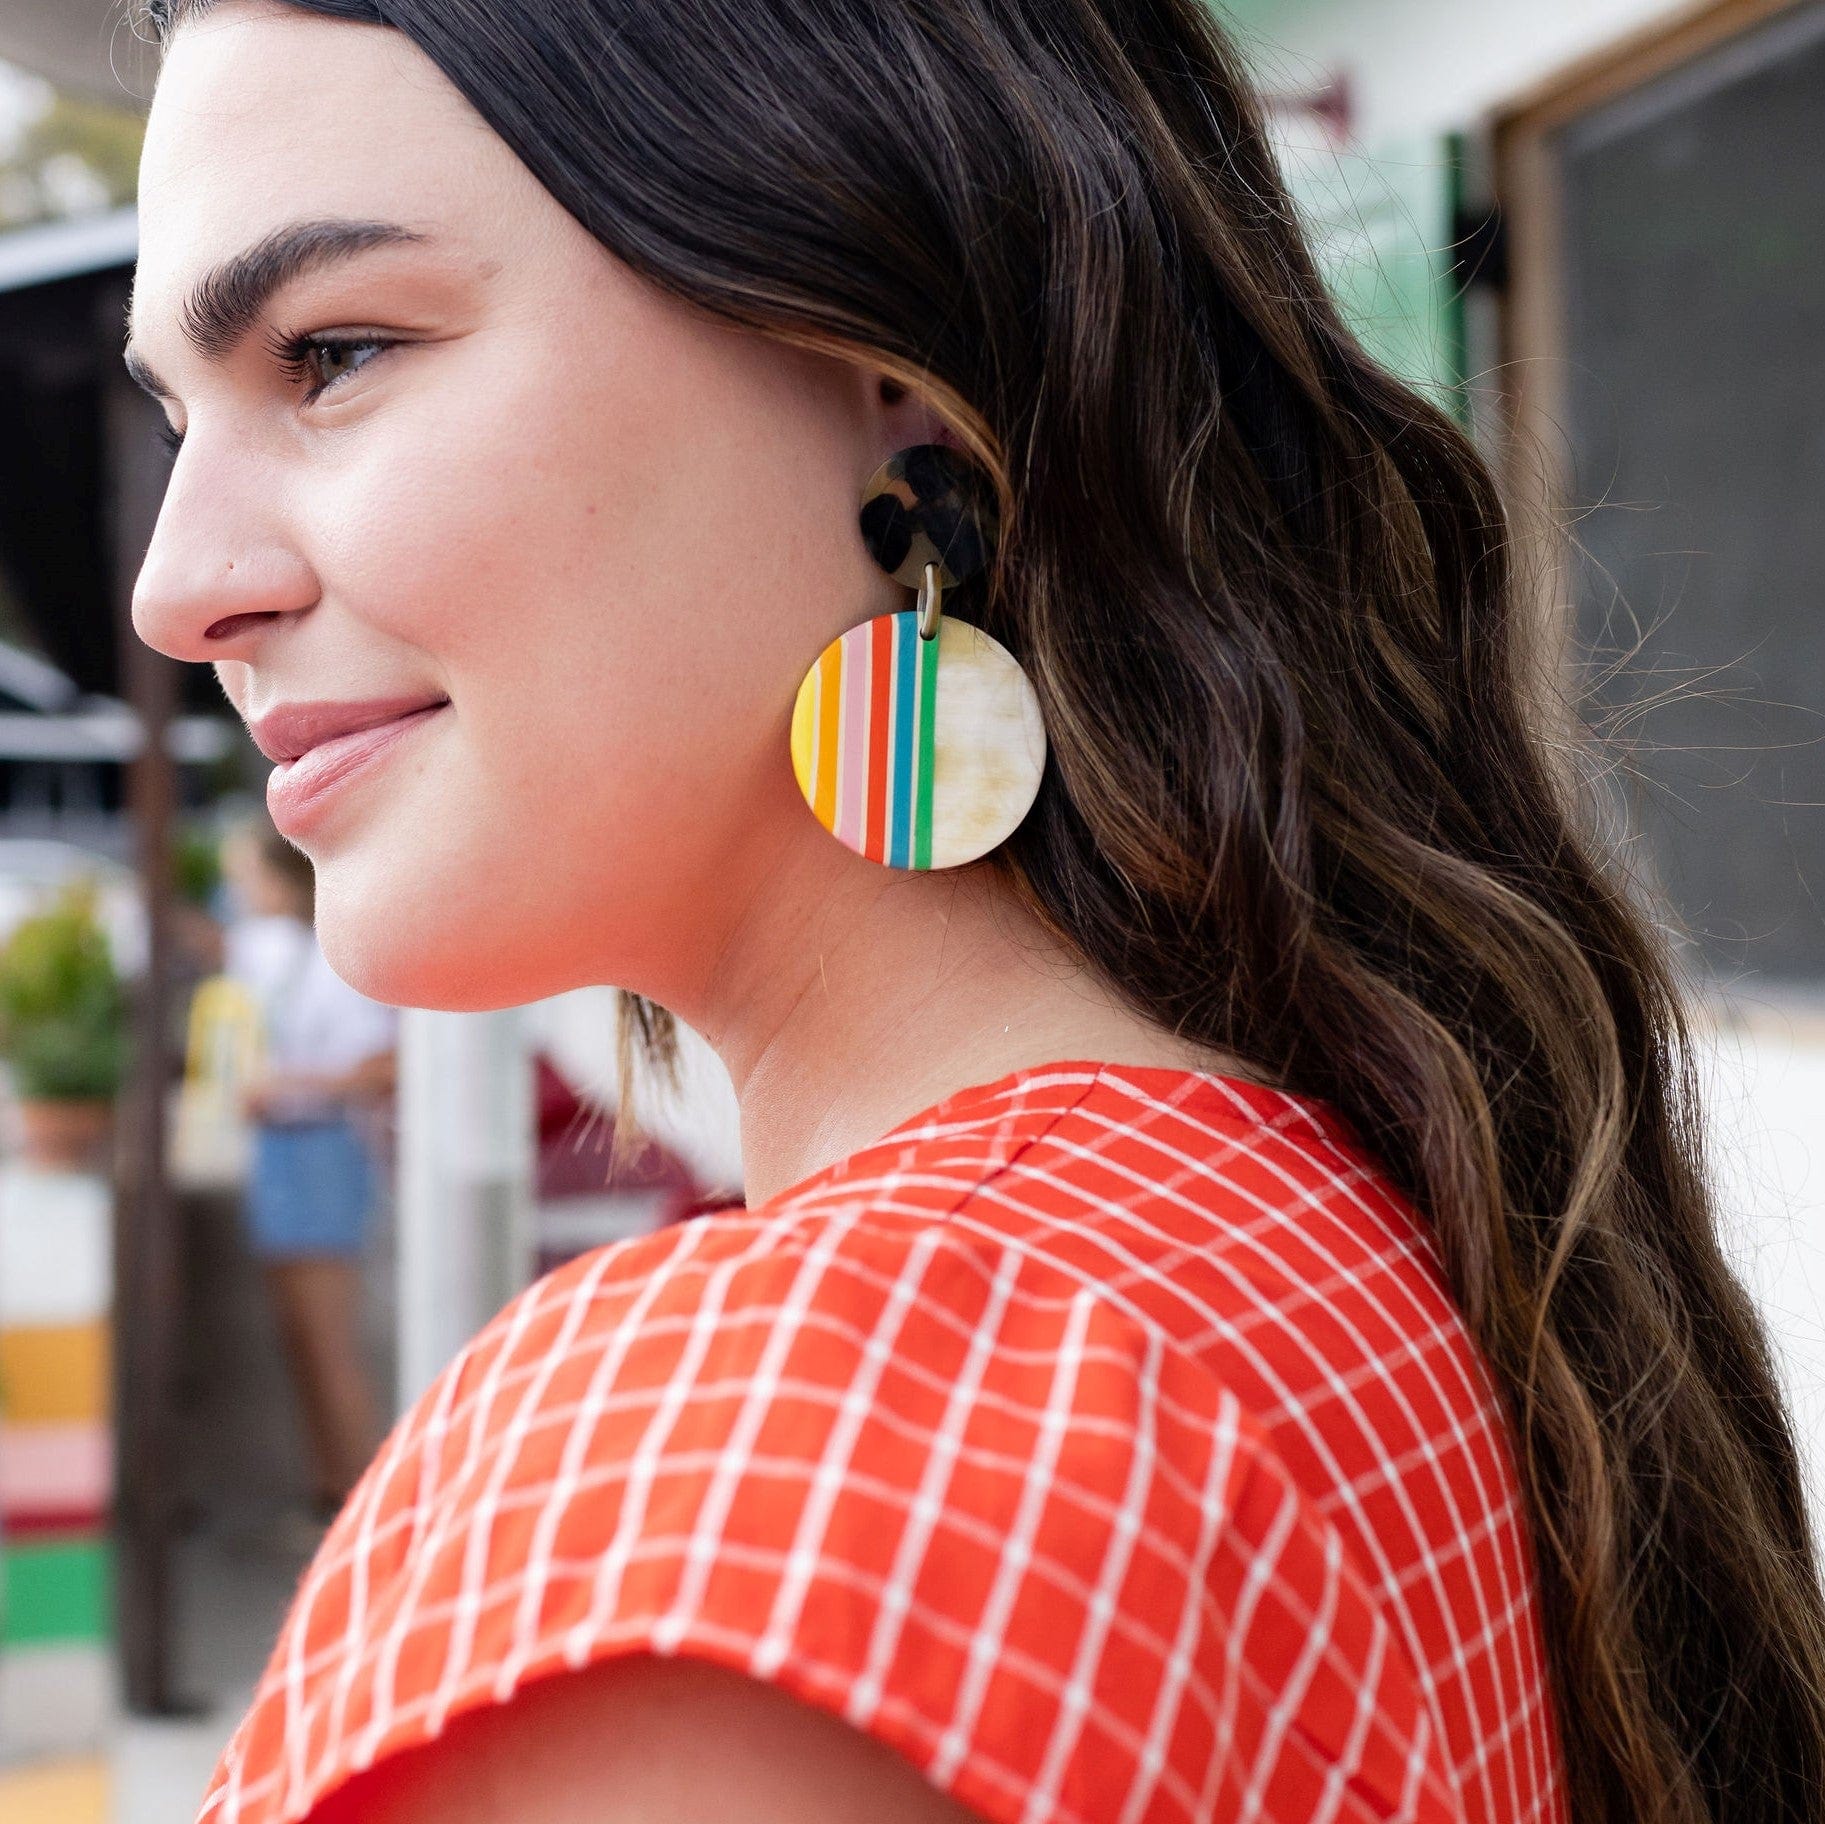 DOT & ARCH dangle and drop Earrings SUBLIMATION Blanks Rainbow